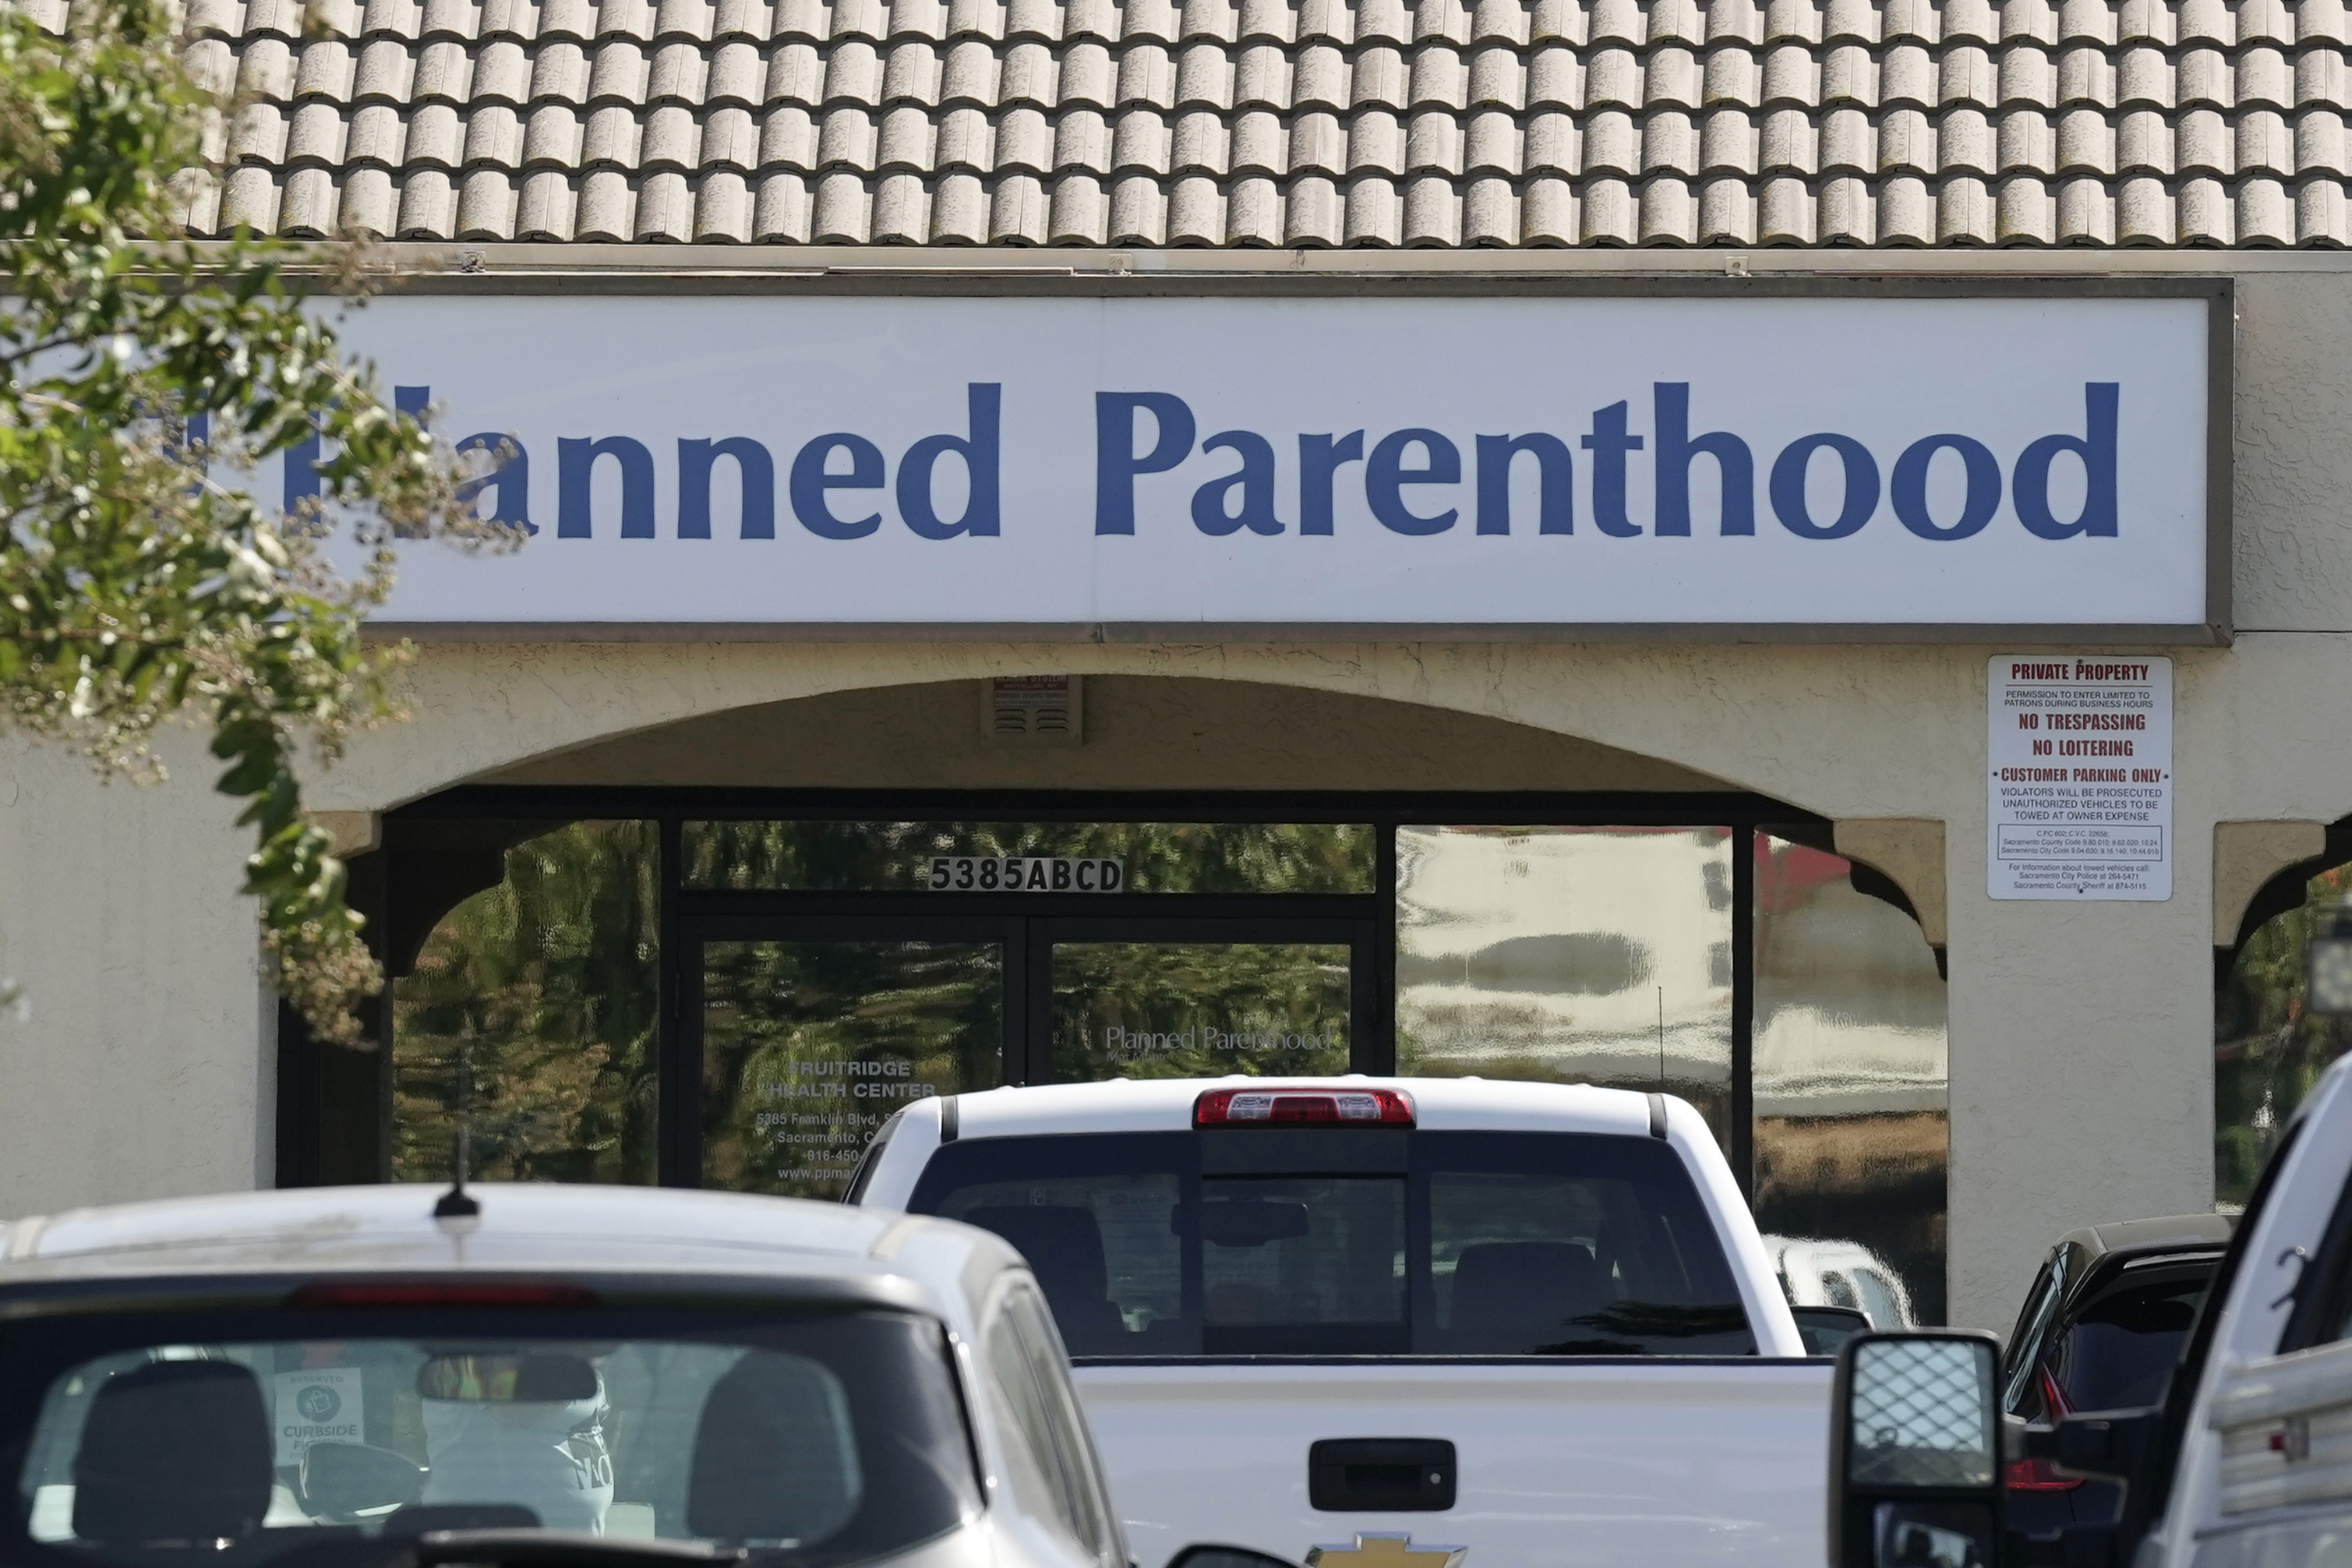 A Planned Parenthood facility is seen in Sacramento on Sept. 13, 2022. (Rich Pedroncelli/Associated Press)